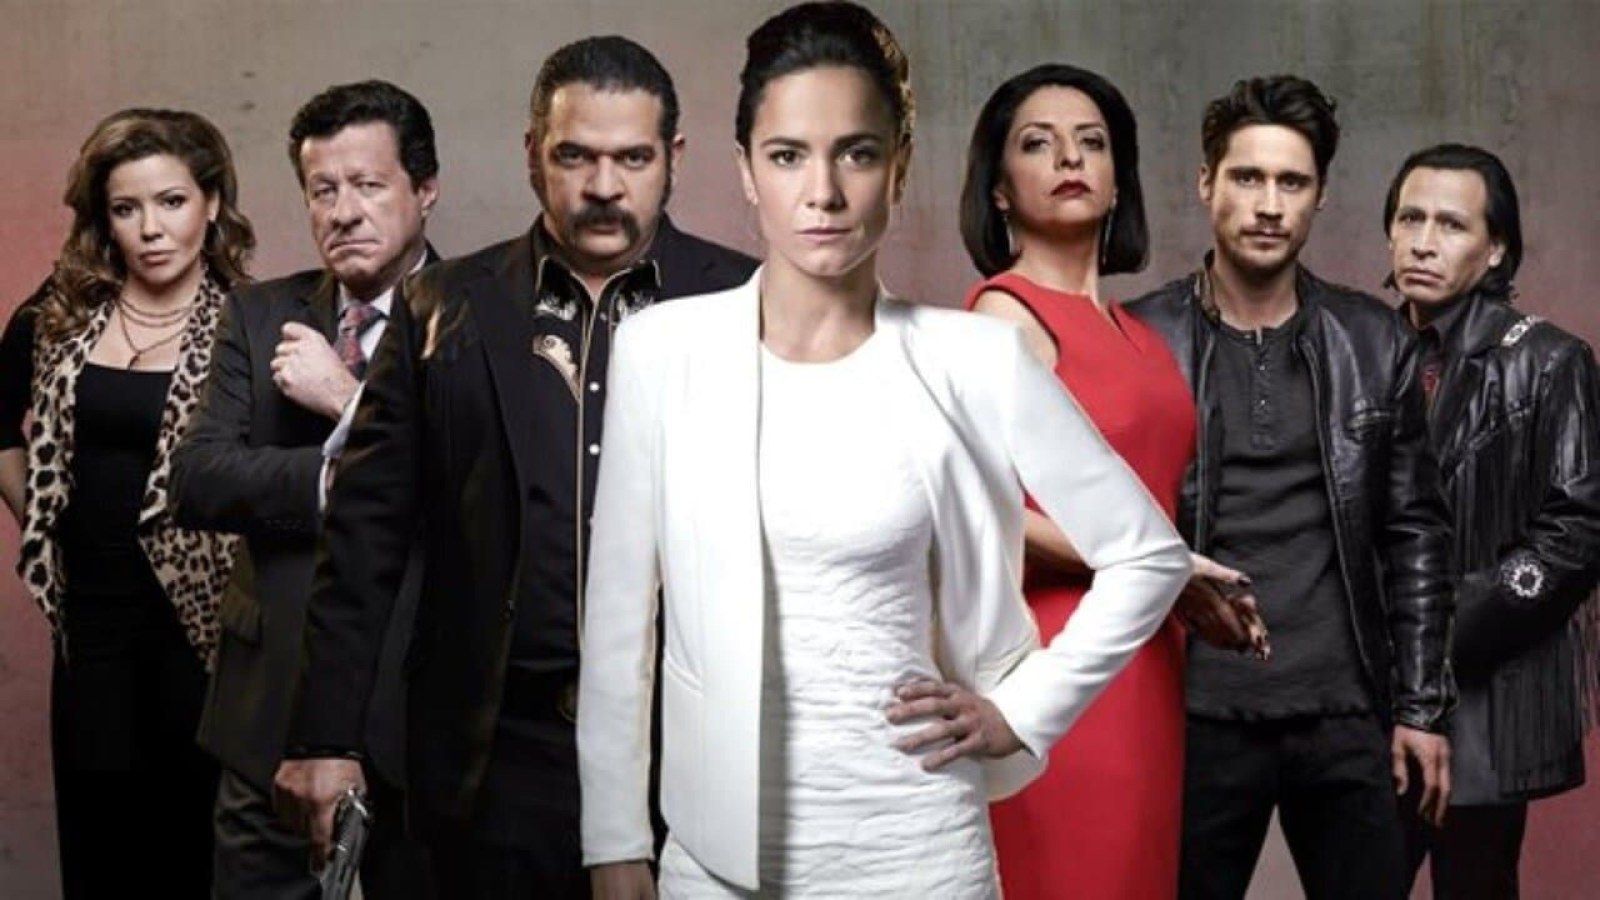 Queen Of The South Season 5 - Current Updates on Release Date, Cast, and Plot in 2022